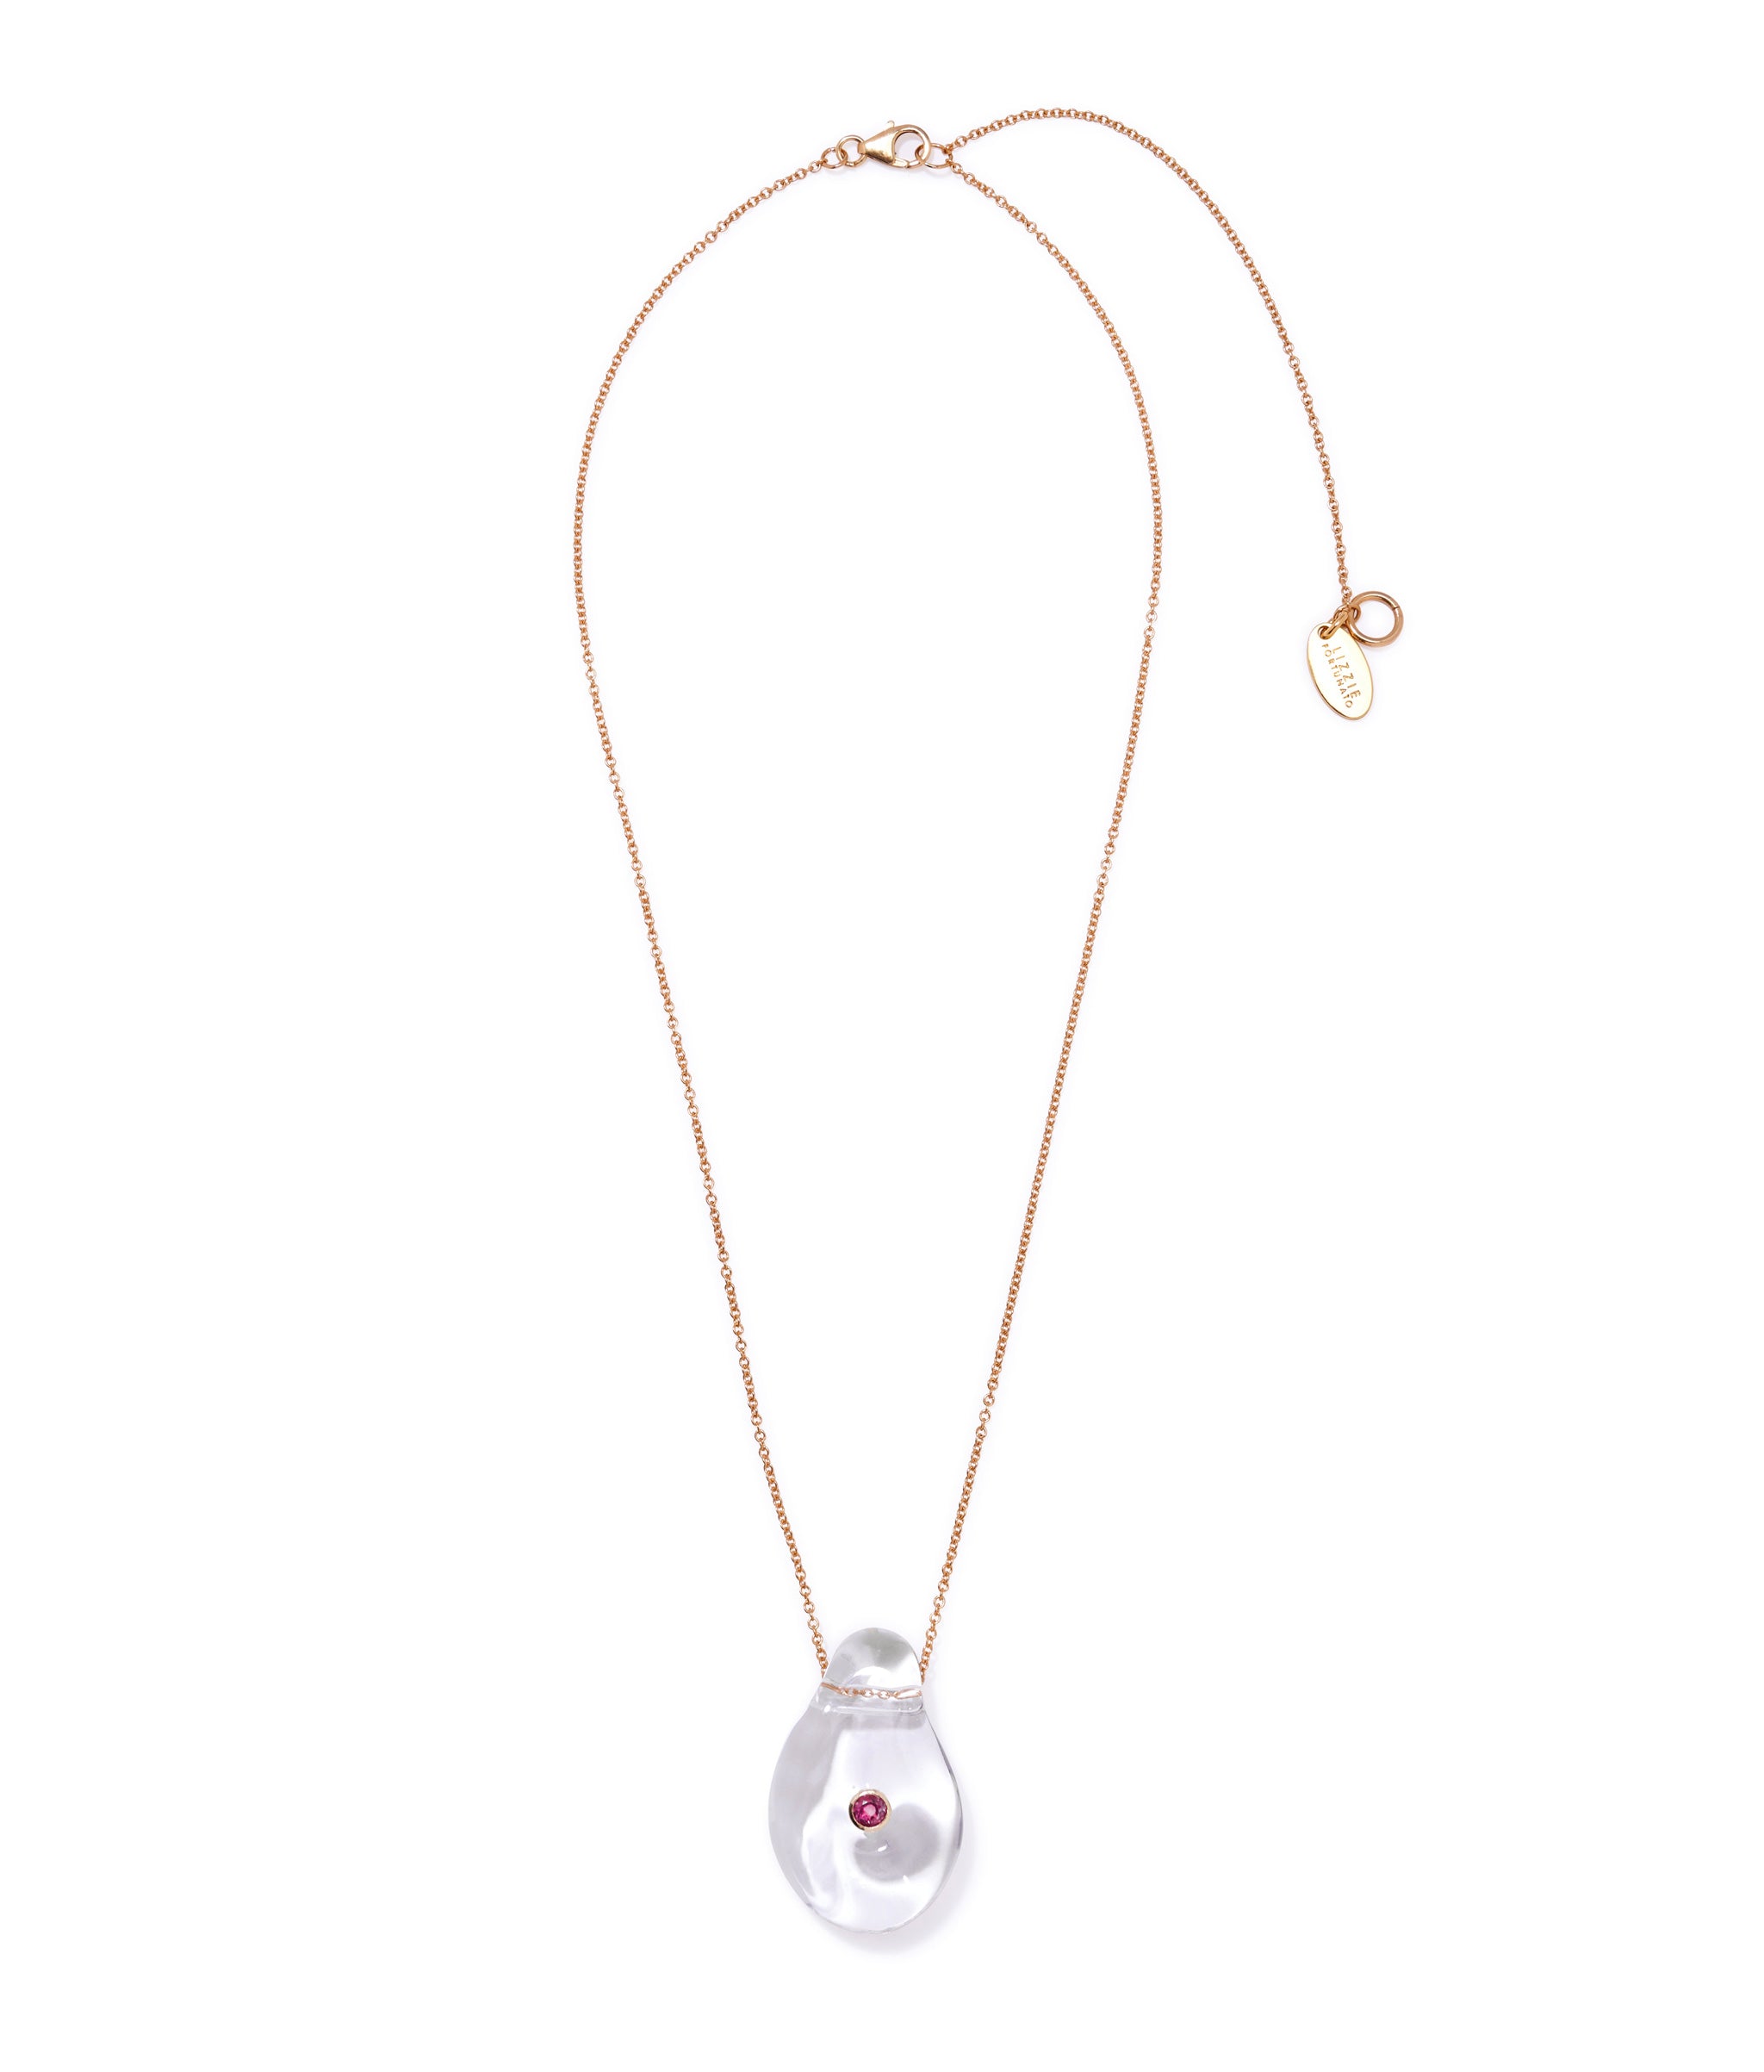 Muse Pendant Necklace in Clear. Thin gold-plated silver chain with clear glass teardrop pendant inset with rhodolite